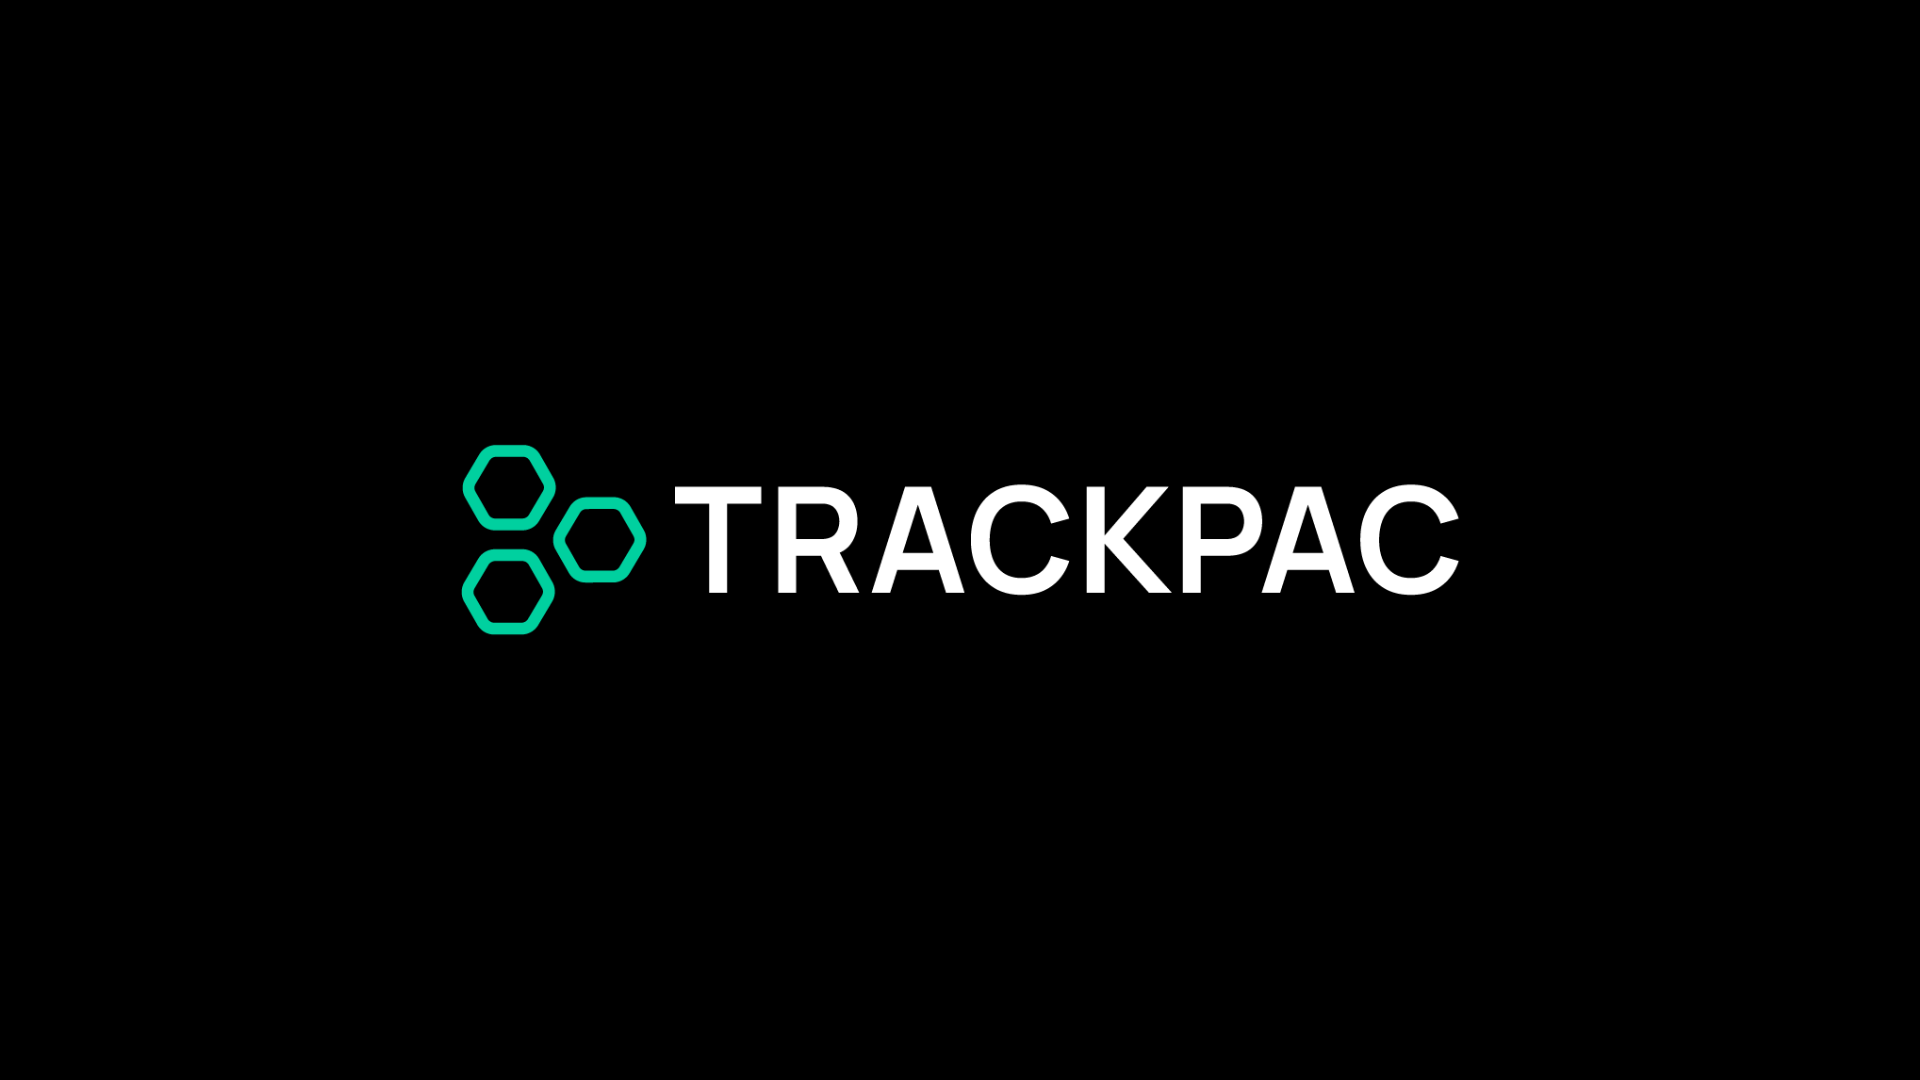 Welcome to the new Trackpac website